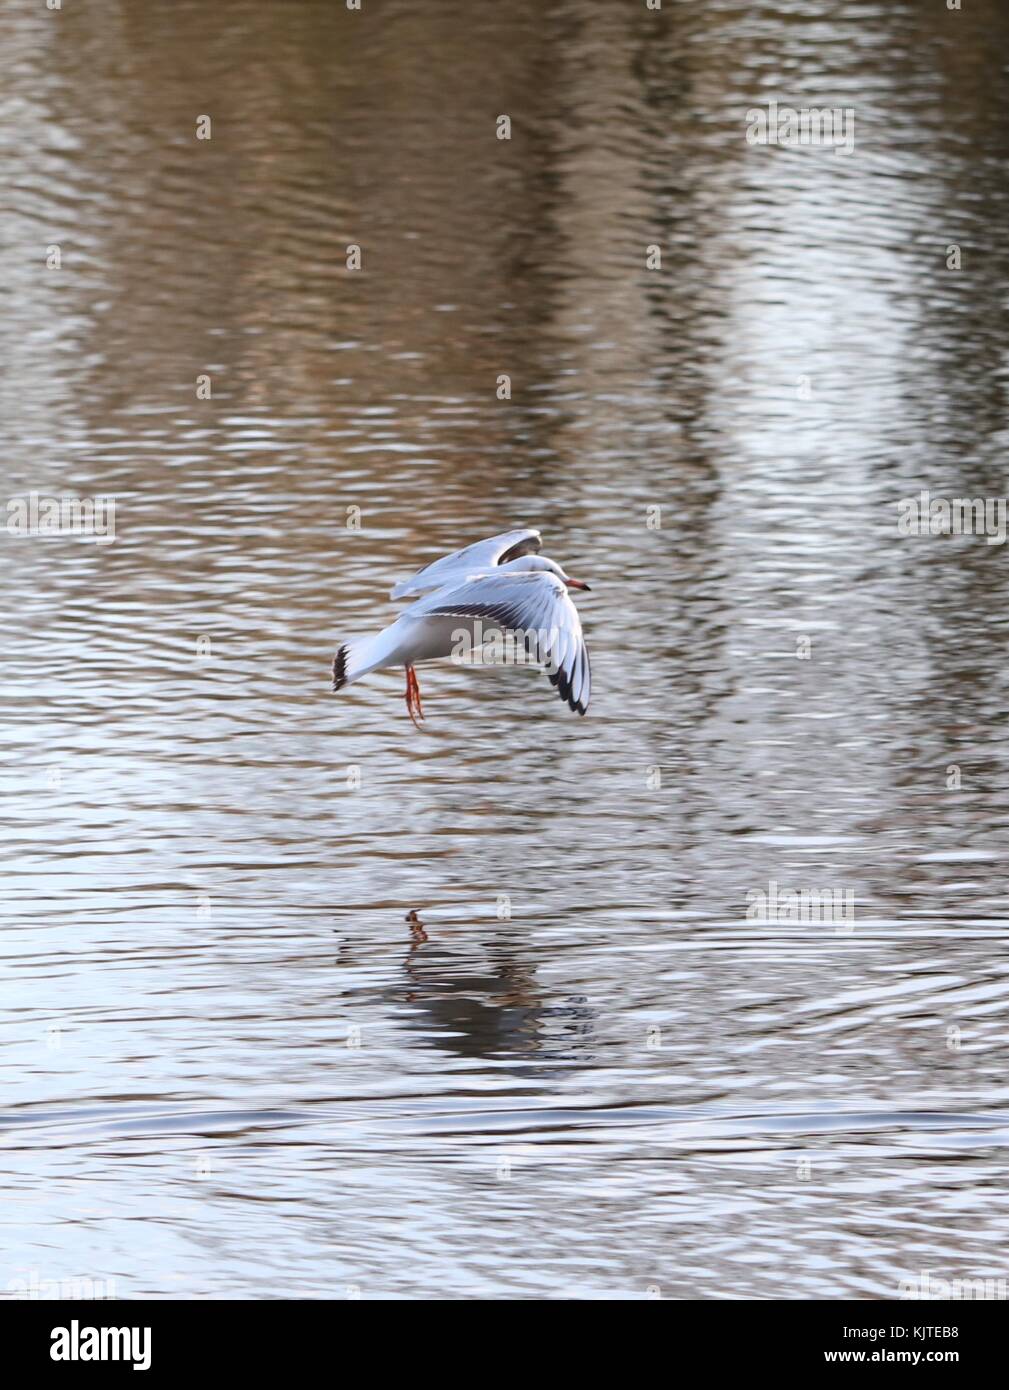 Single bird swooping down over a lake water reflecting Stock Photo - Alamy